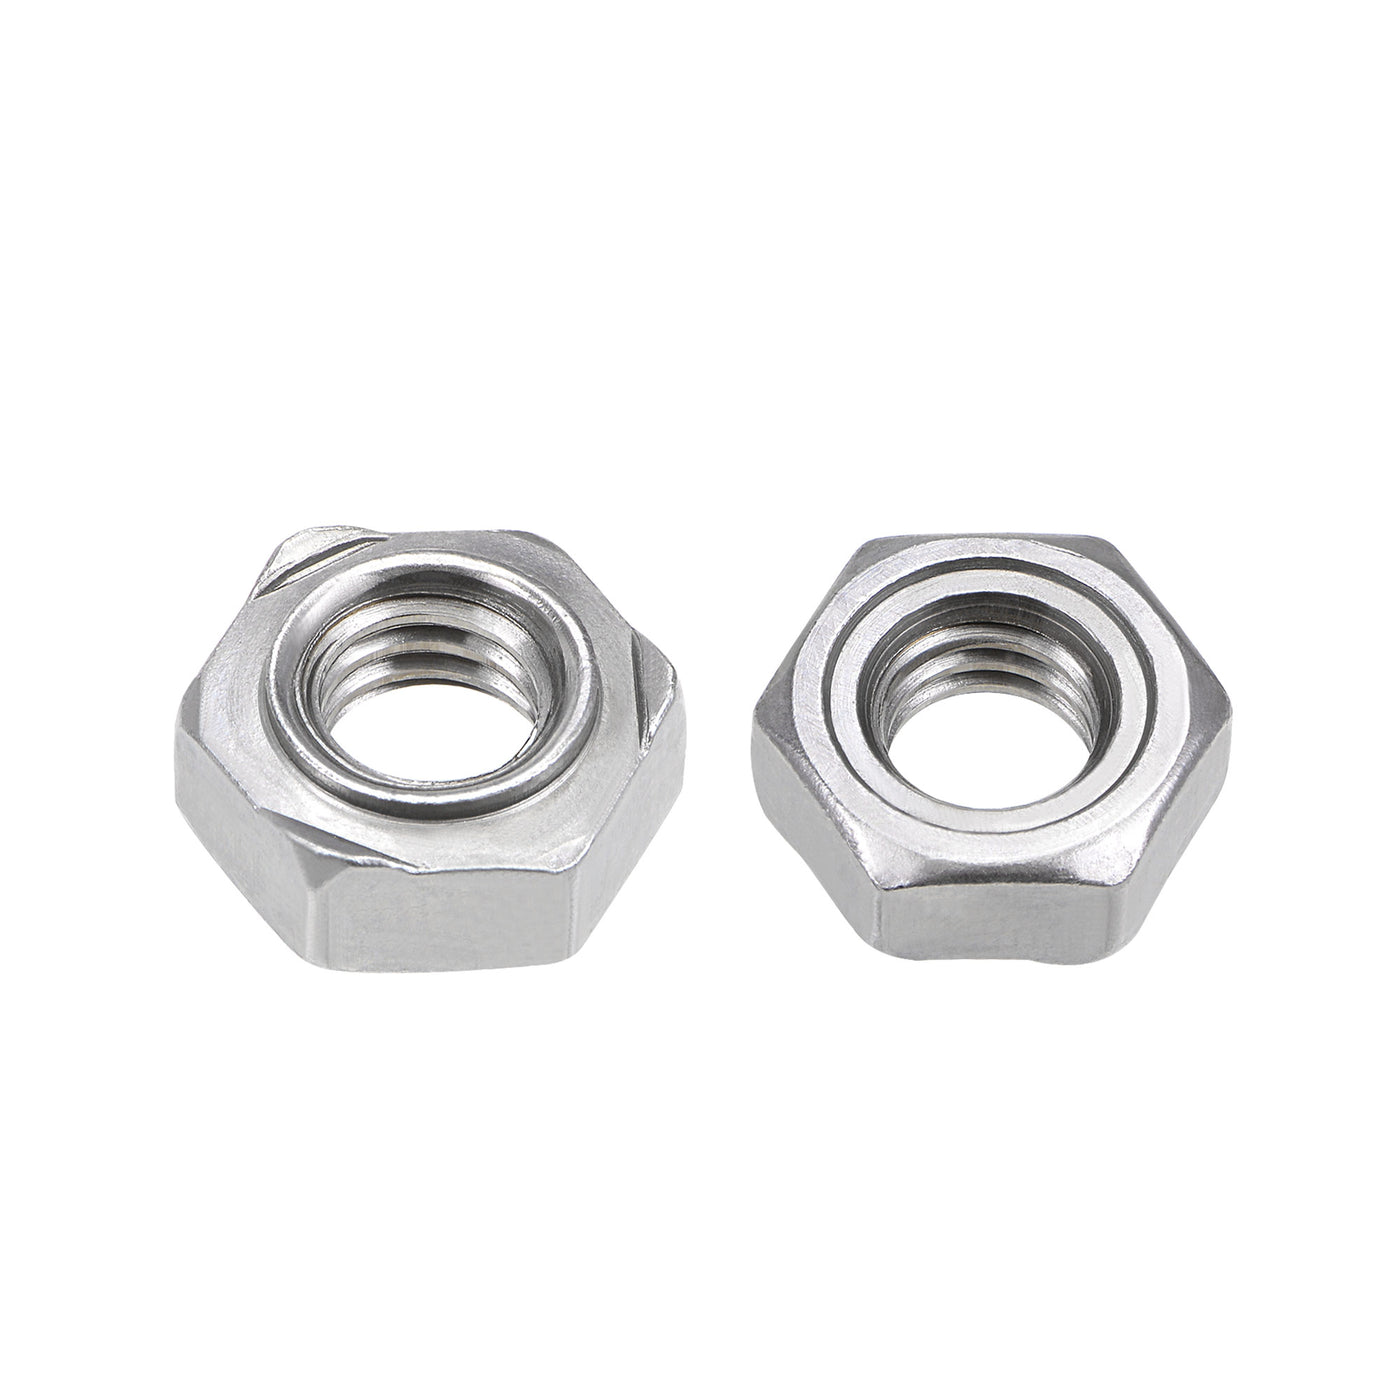 Uxcell Uxcell Hex Weld Nuts,1/2-13 Carbon Steel with 3 Projections Machine Screw Gray 10pcs